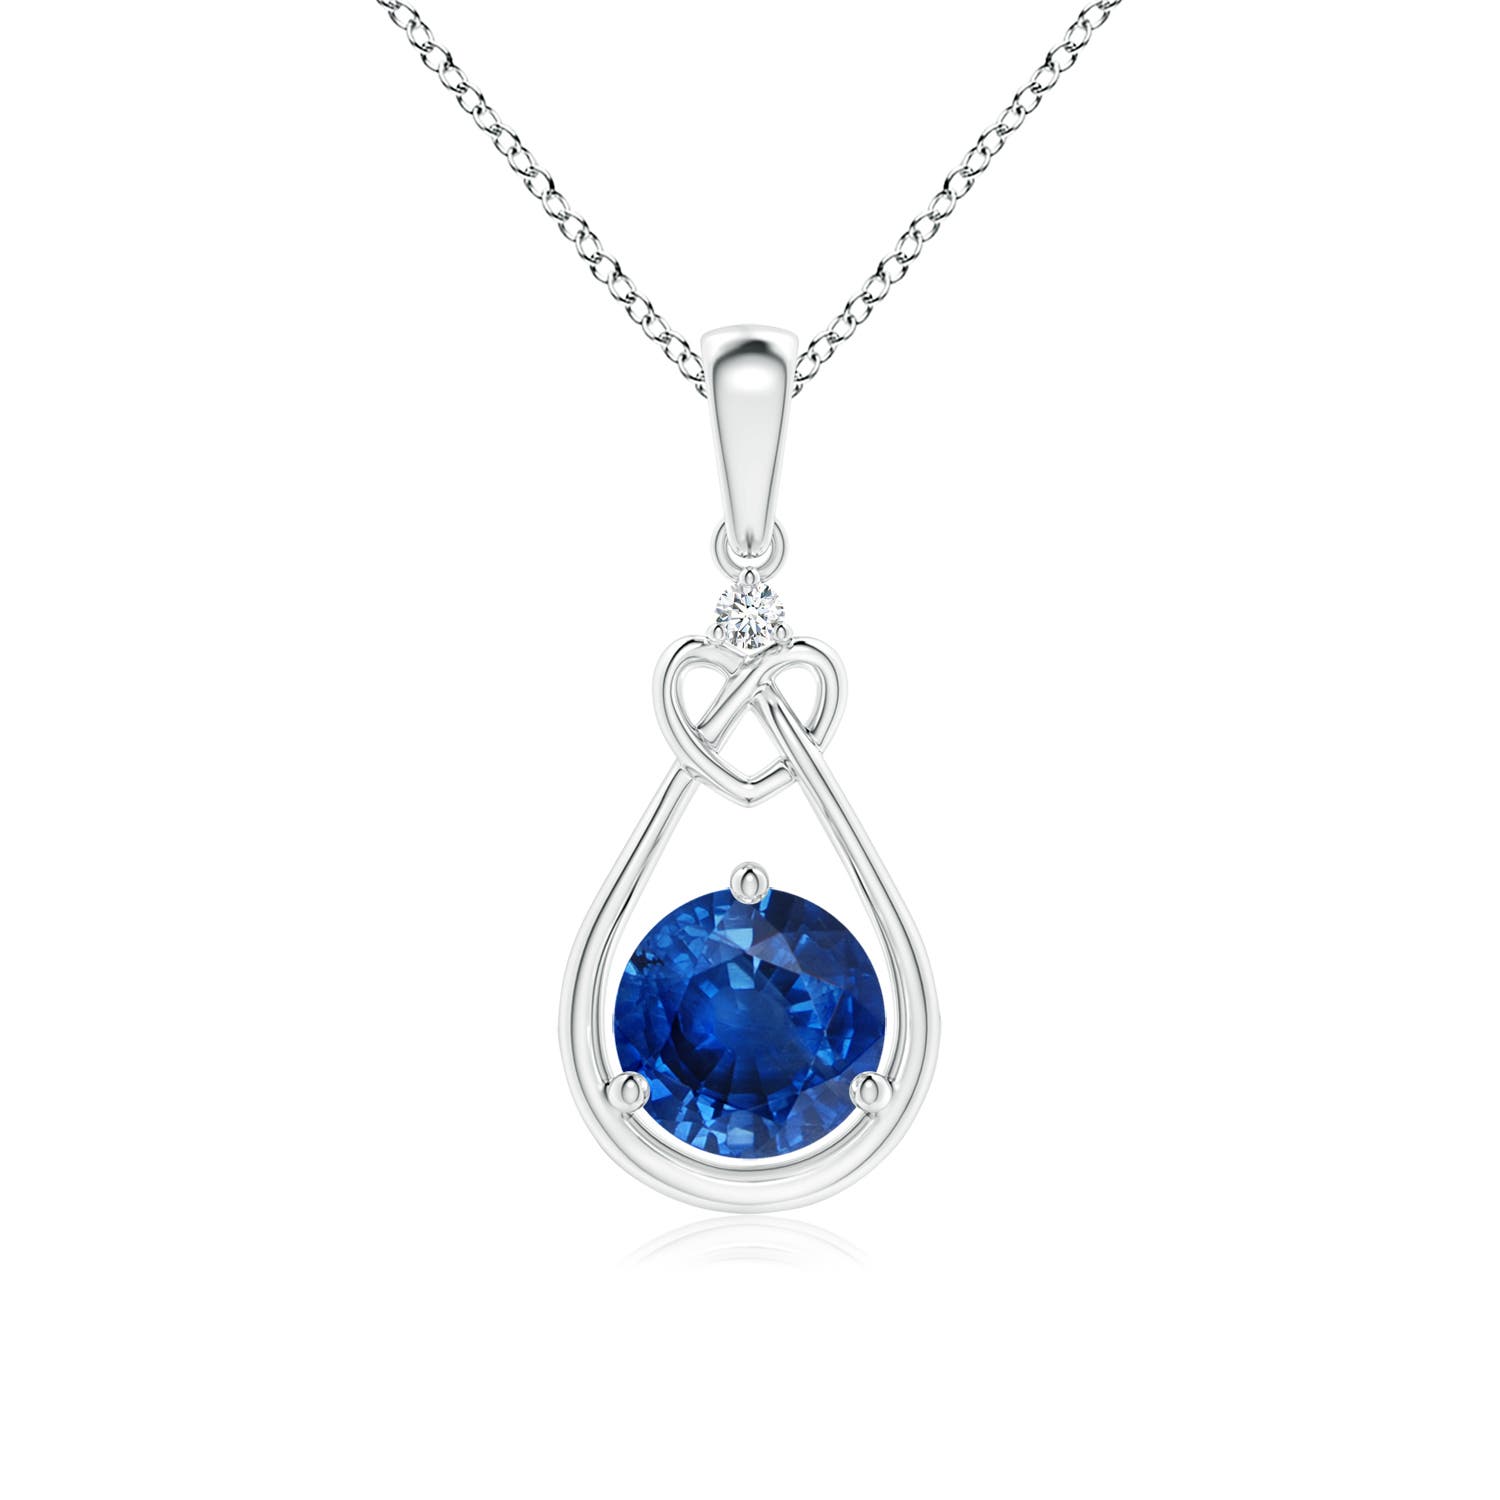 AAA - Blue Sapphire / 1.01 CT / 14 KT White Gold